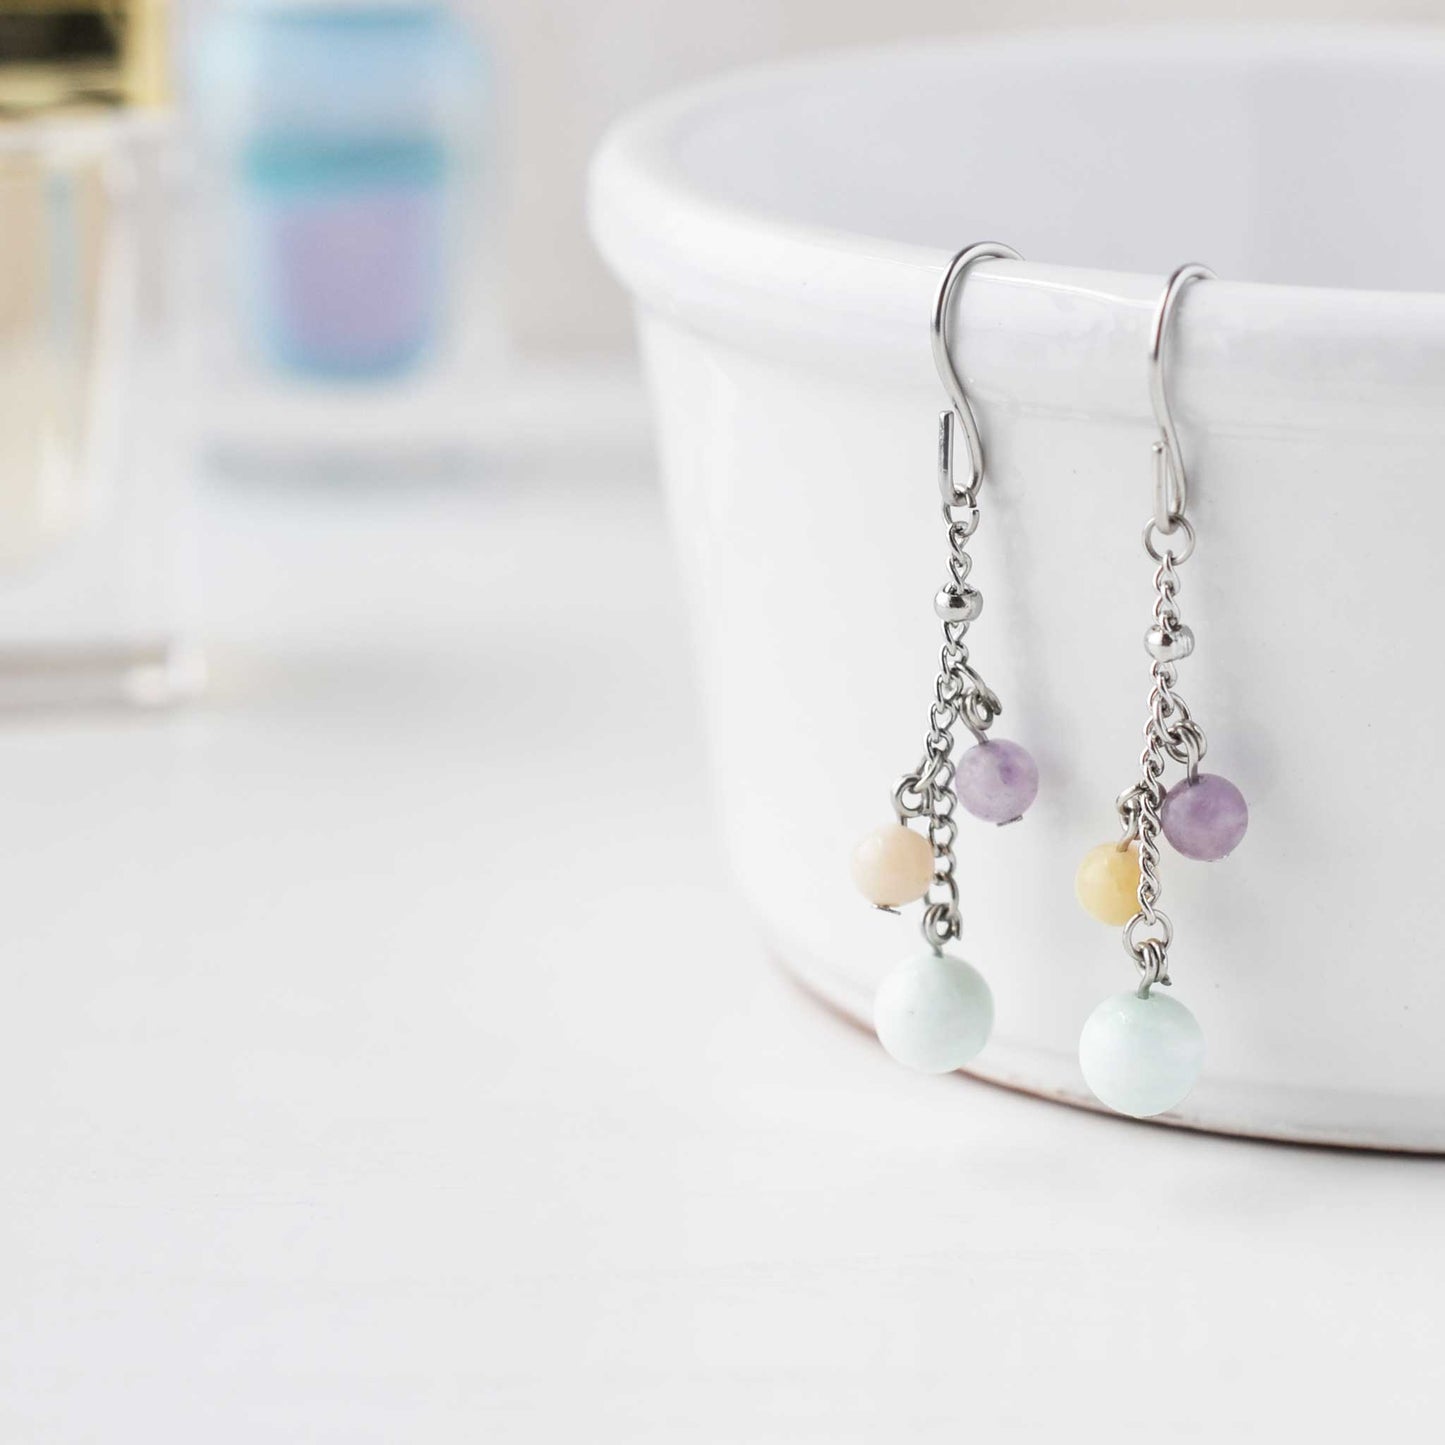 Pastel gemstone drop earrings hanging on white cup against soft focus background